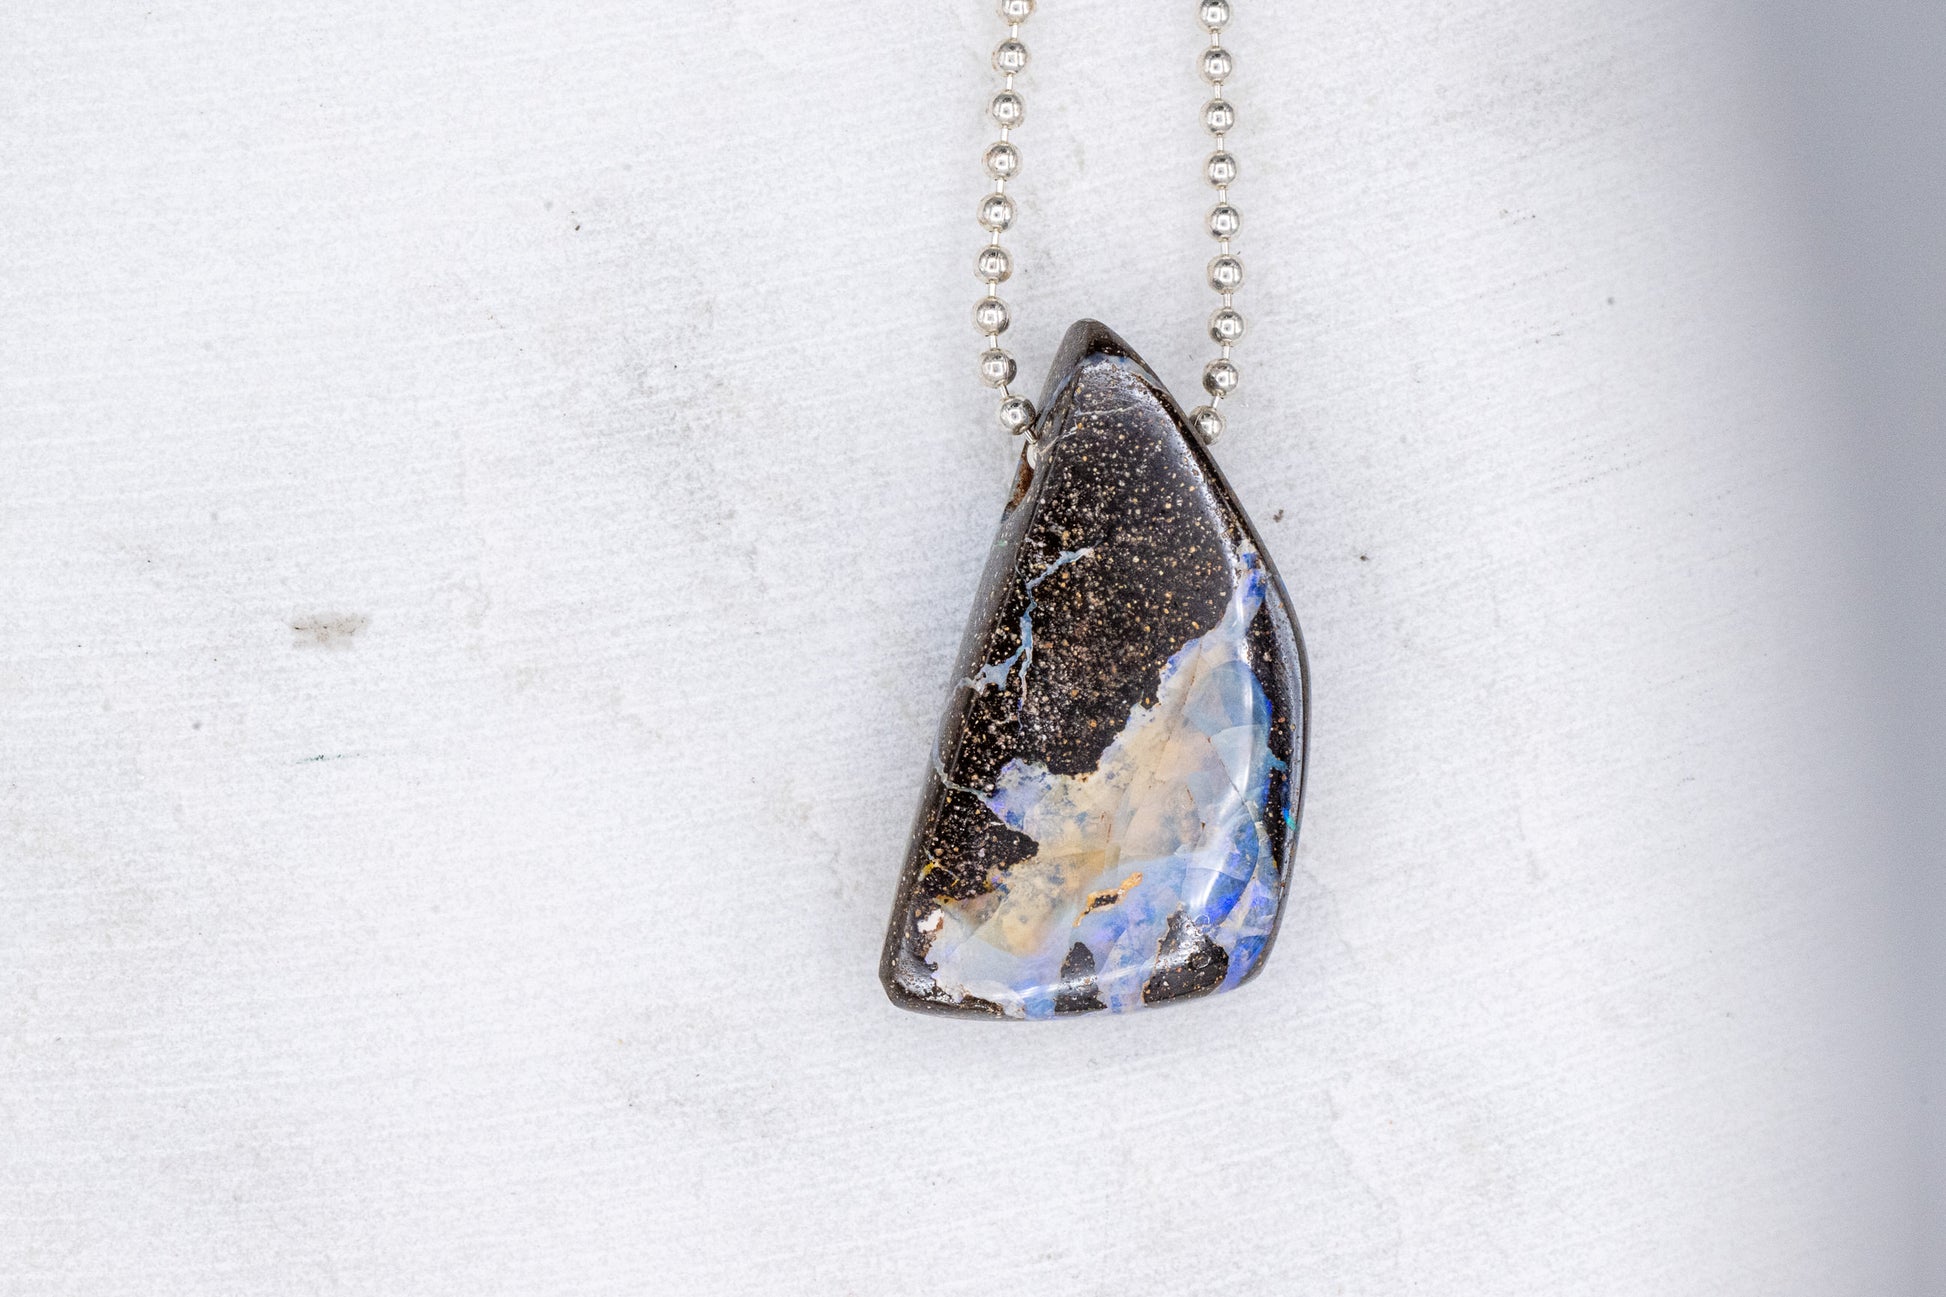 Handmade Australian Opal Necklace with a blue and brown stone sold by Cassin Jewelry.